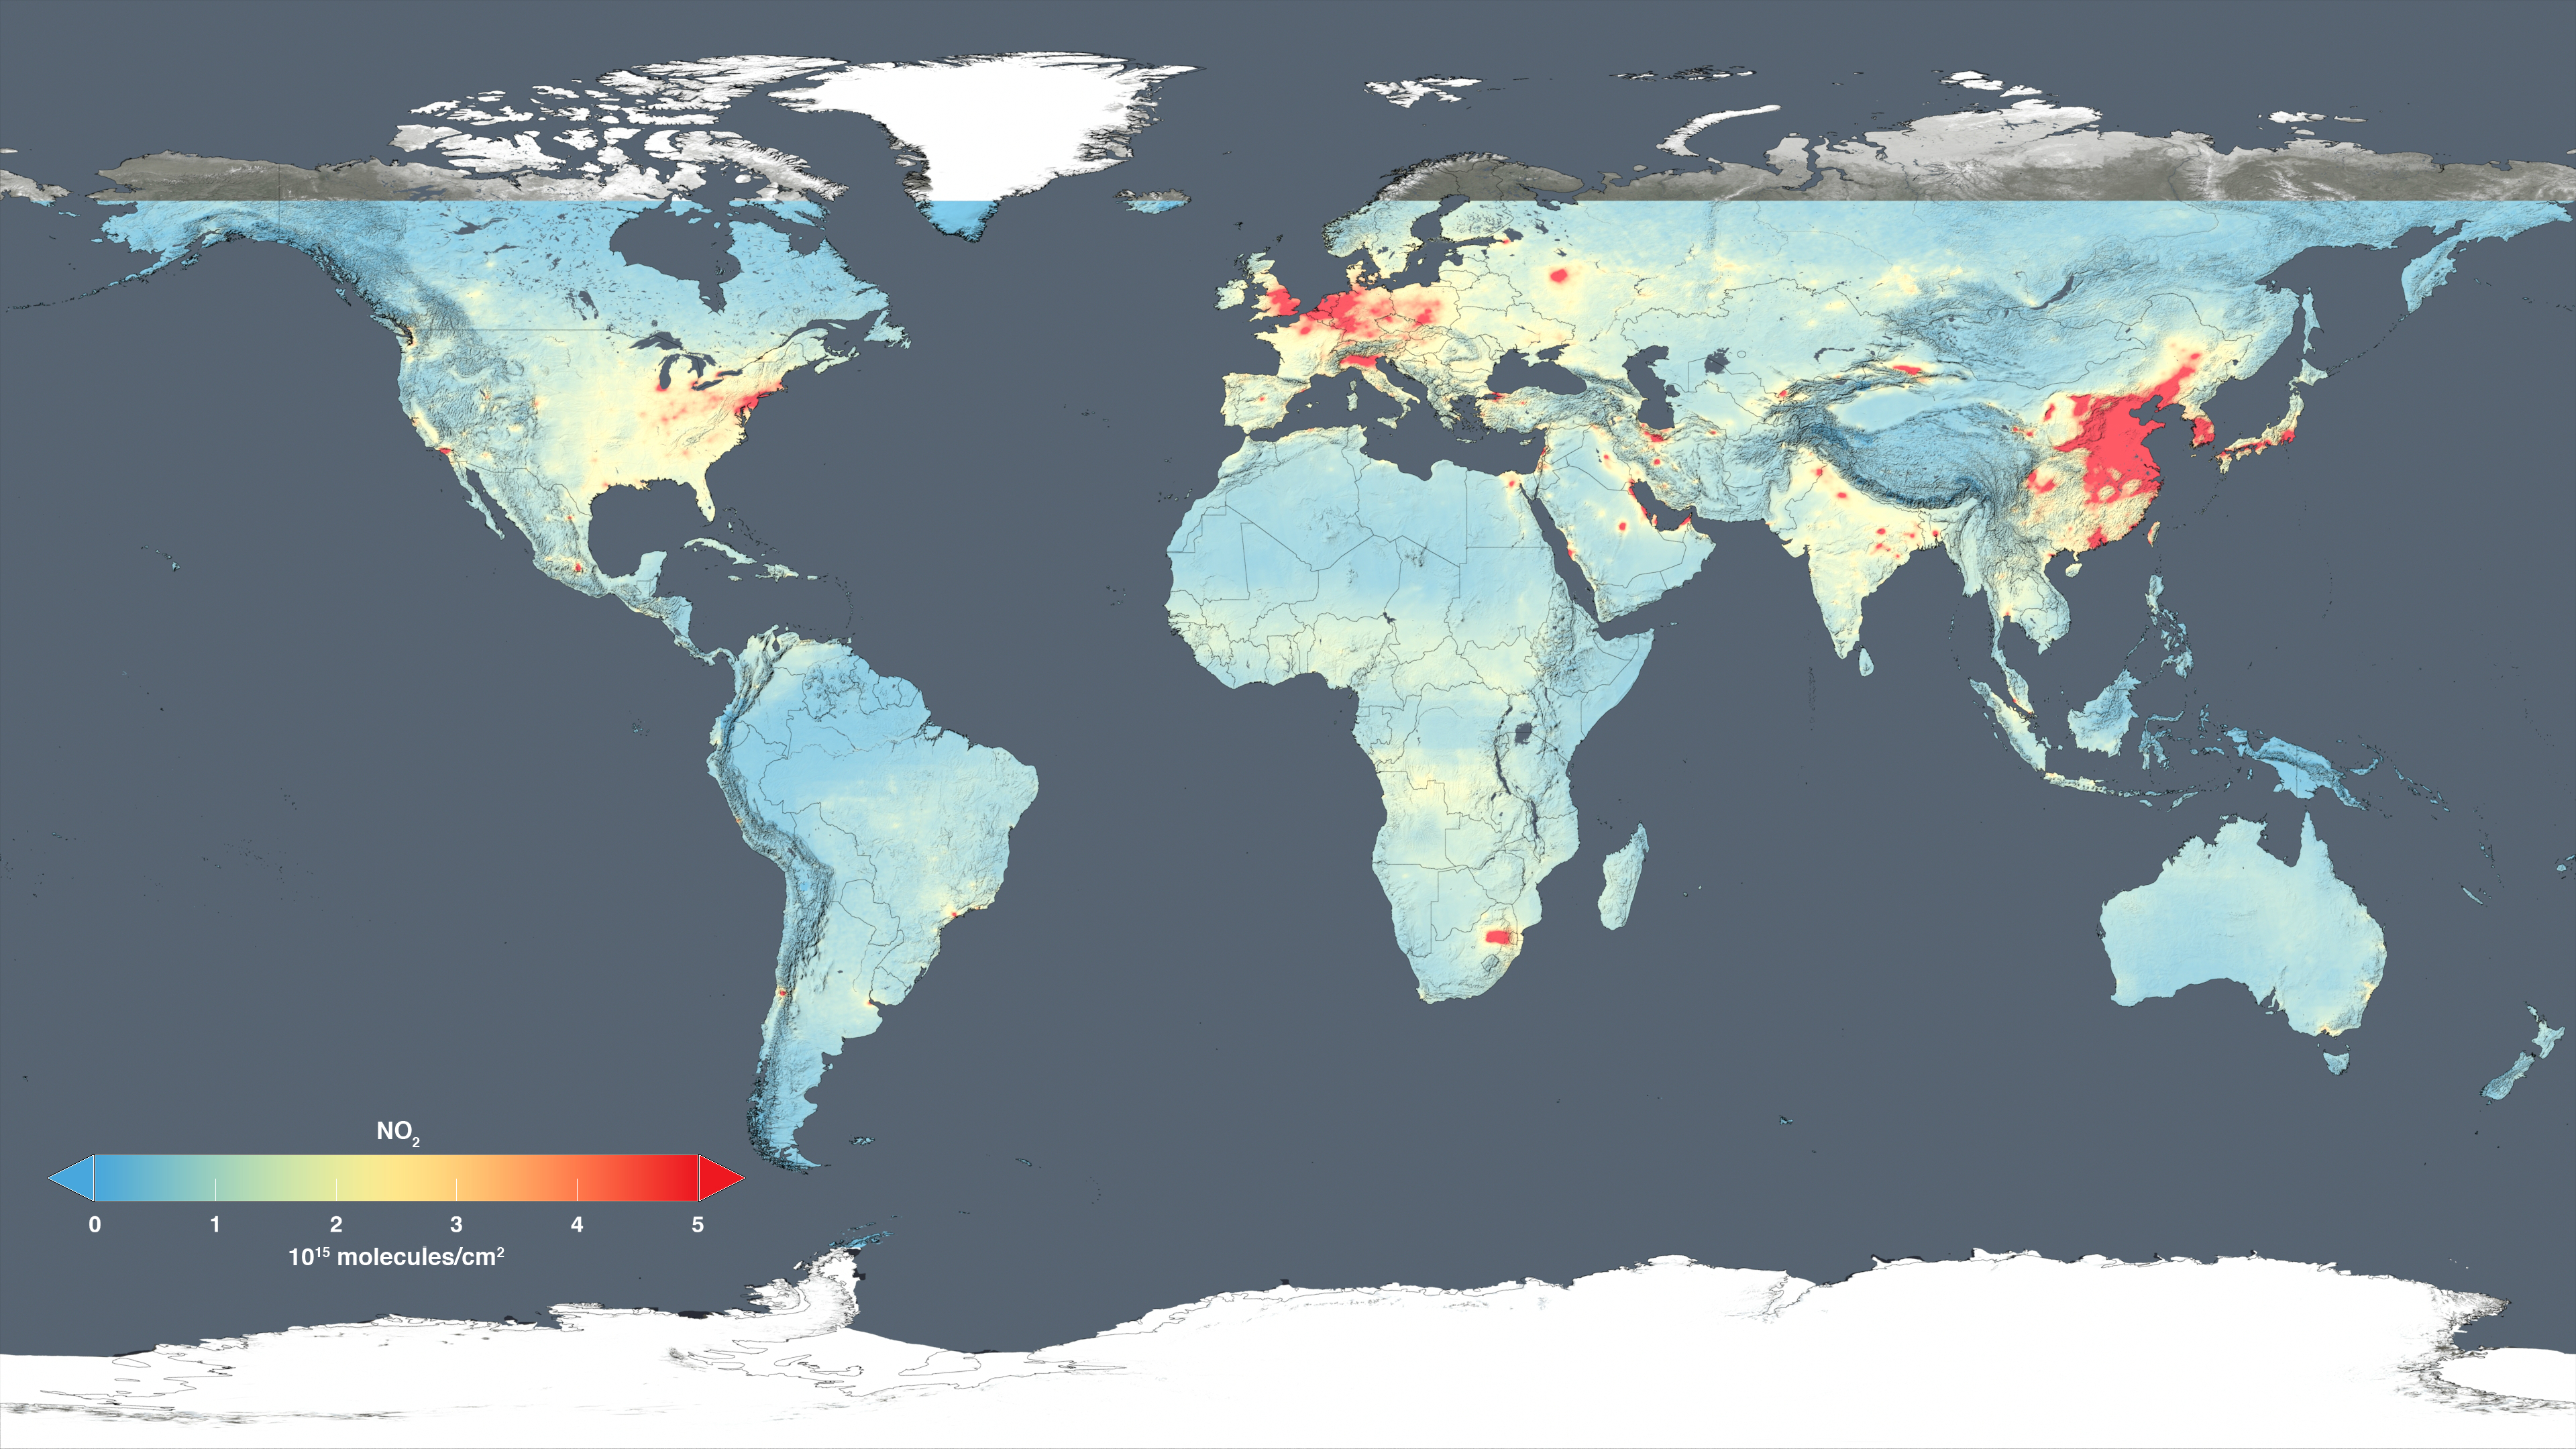 This global map shows the concentration of nitrogen dioxide in the troposphere